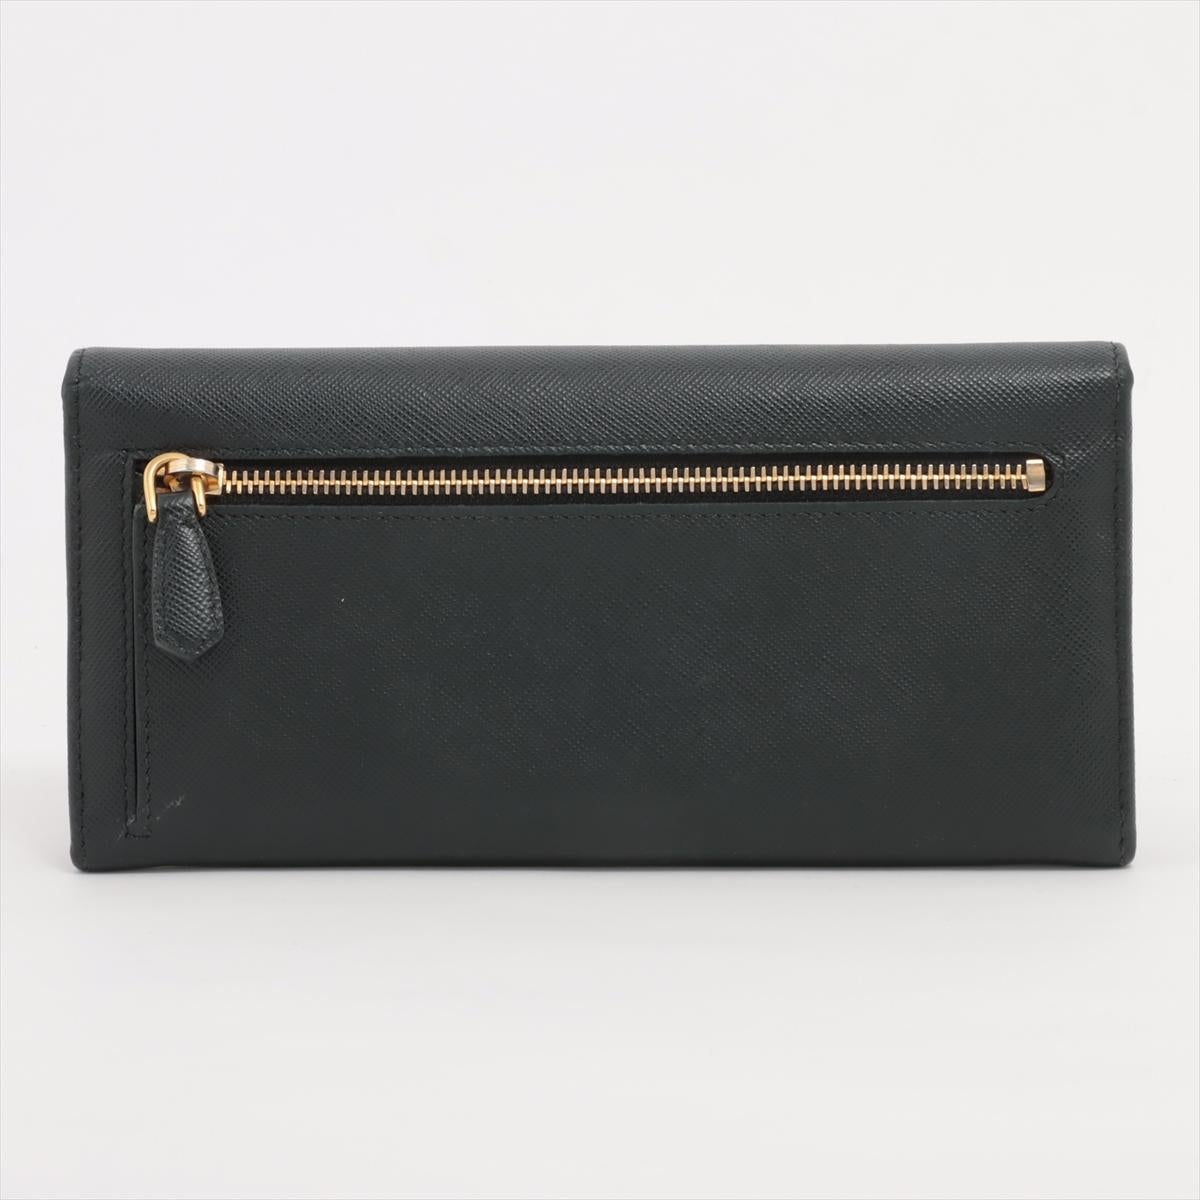 Prada Saffiano Leather Long Wallet Black In Good Condition For Sale In Indianapolis, IN